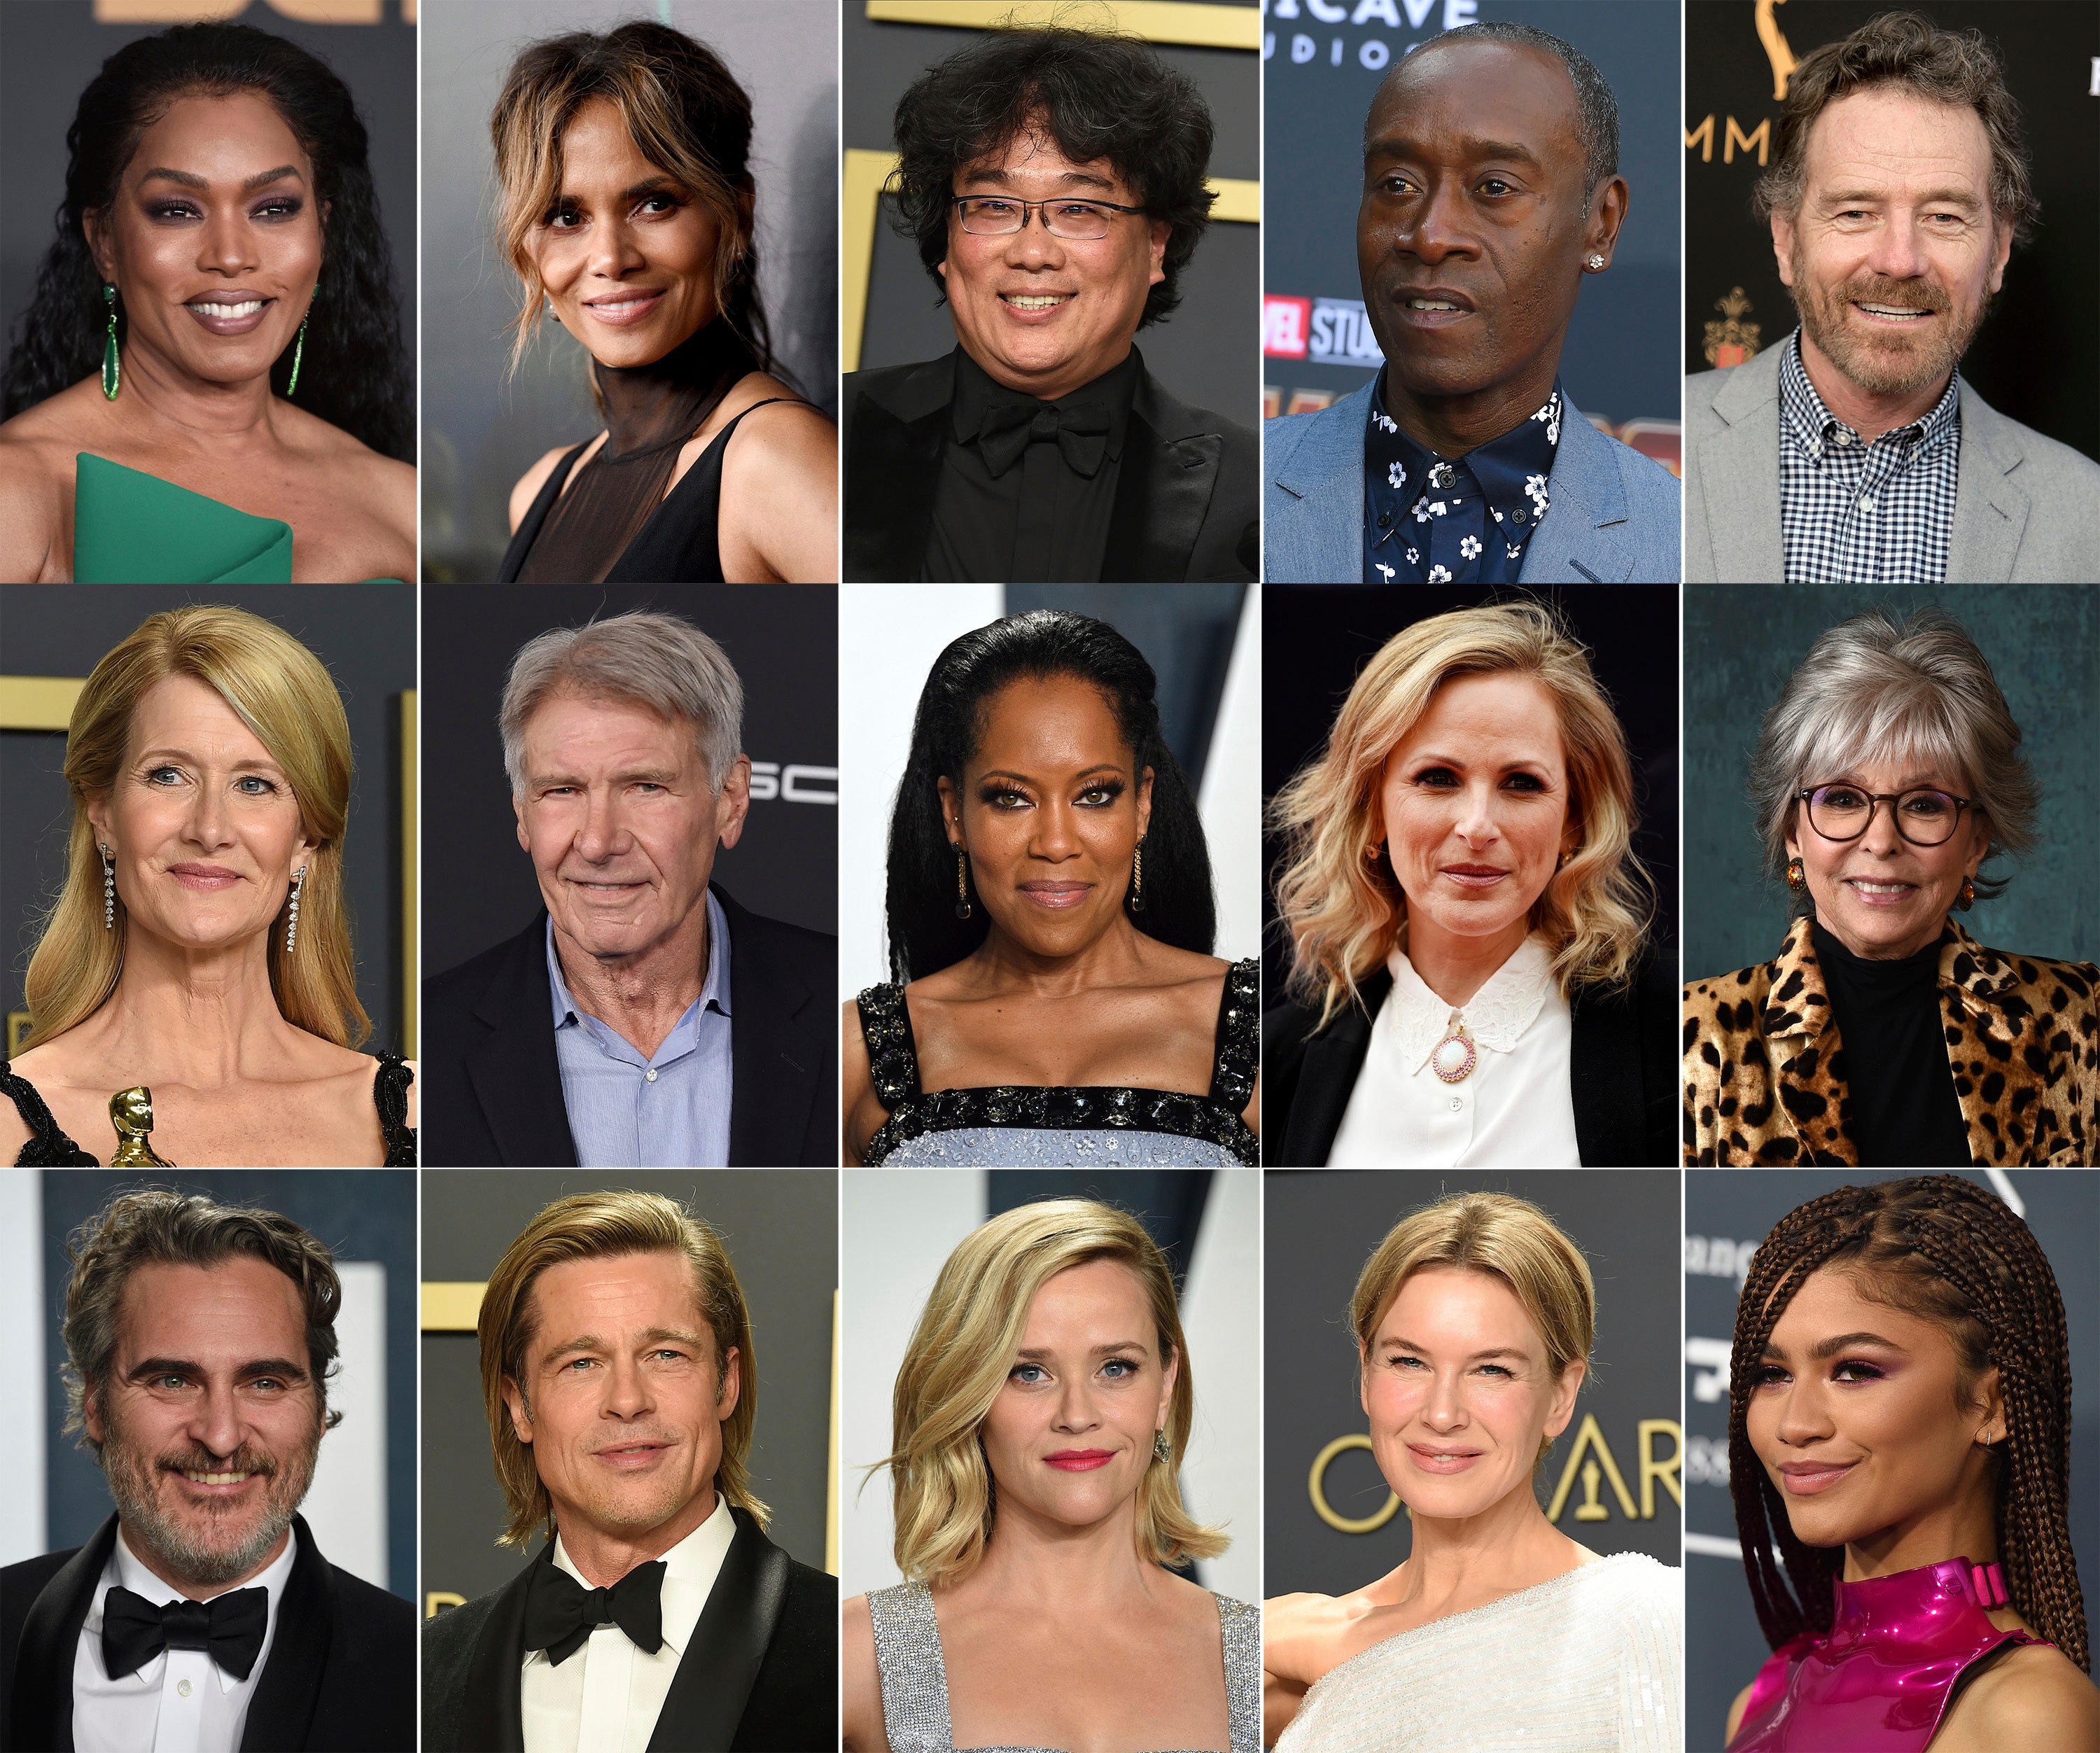 Oscars 2021 reveals A-list roster of presenters